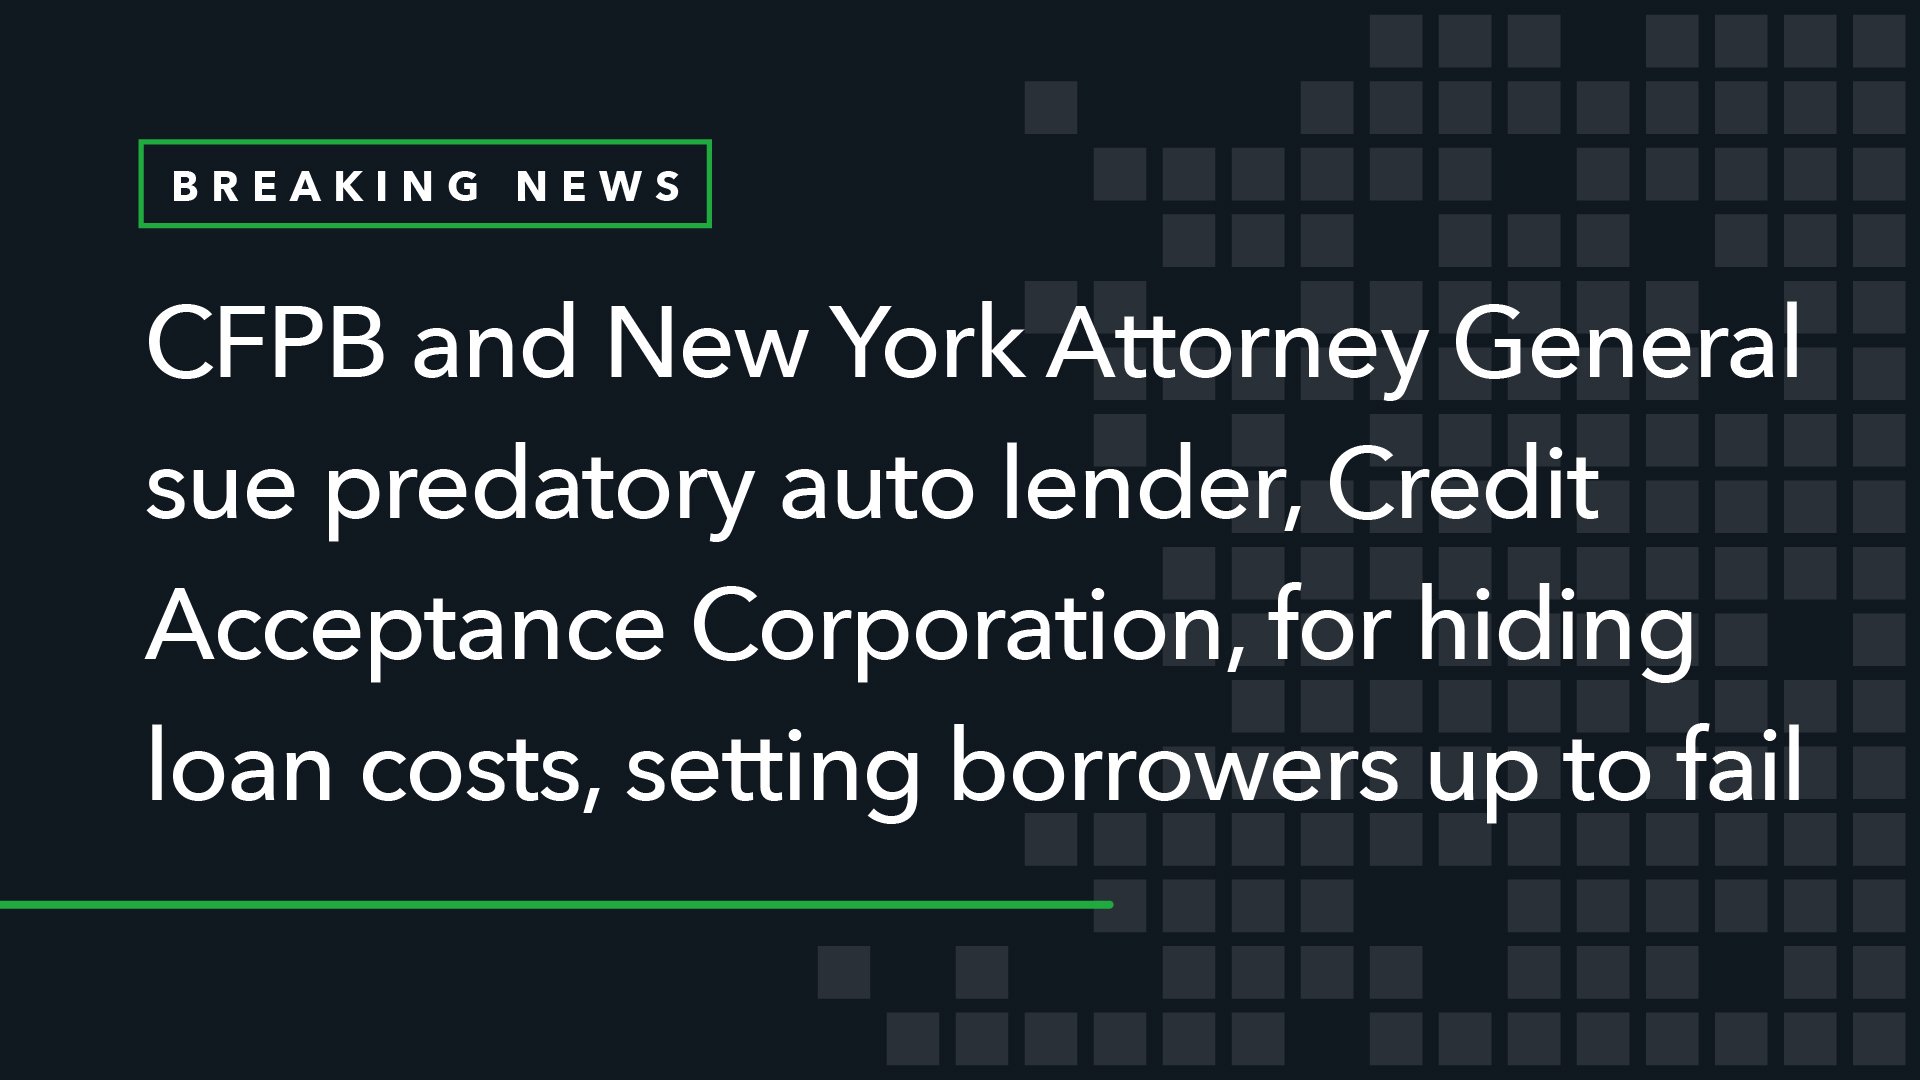 CFPB and New York Attorney General Sue Credit Acceptance for Hiding Auto Loan Costs, Setting Borrowers Up to Fail